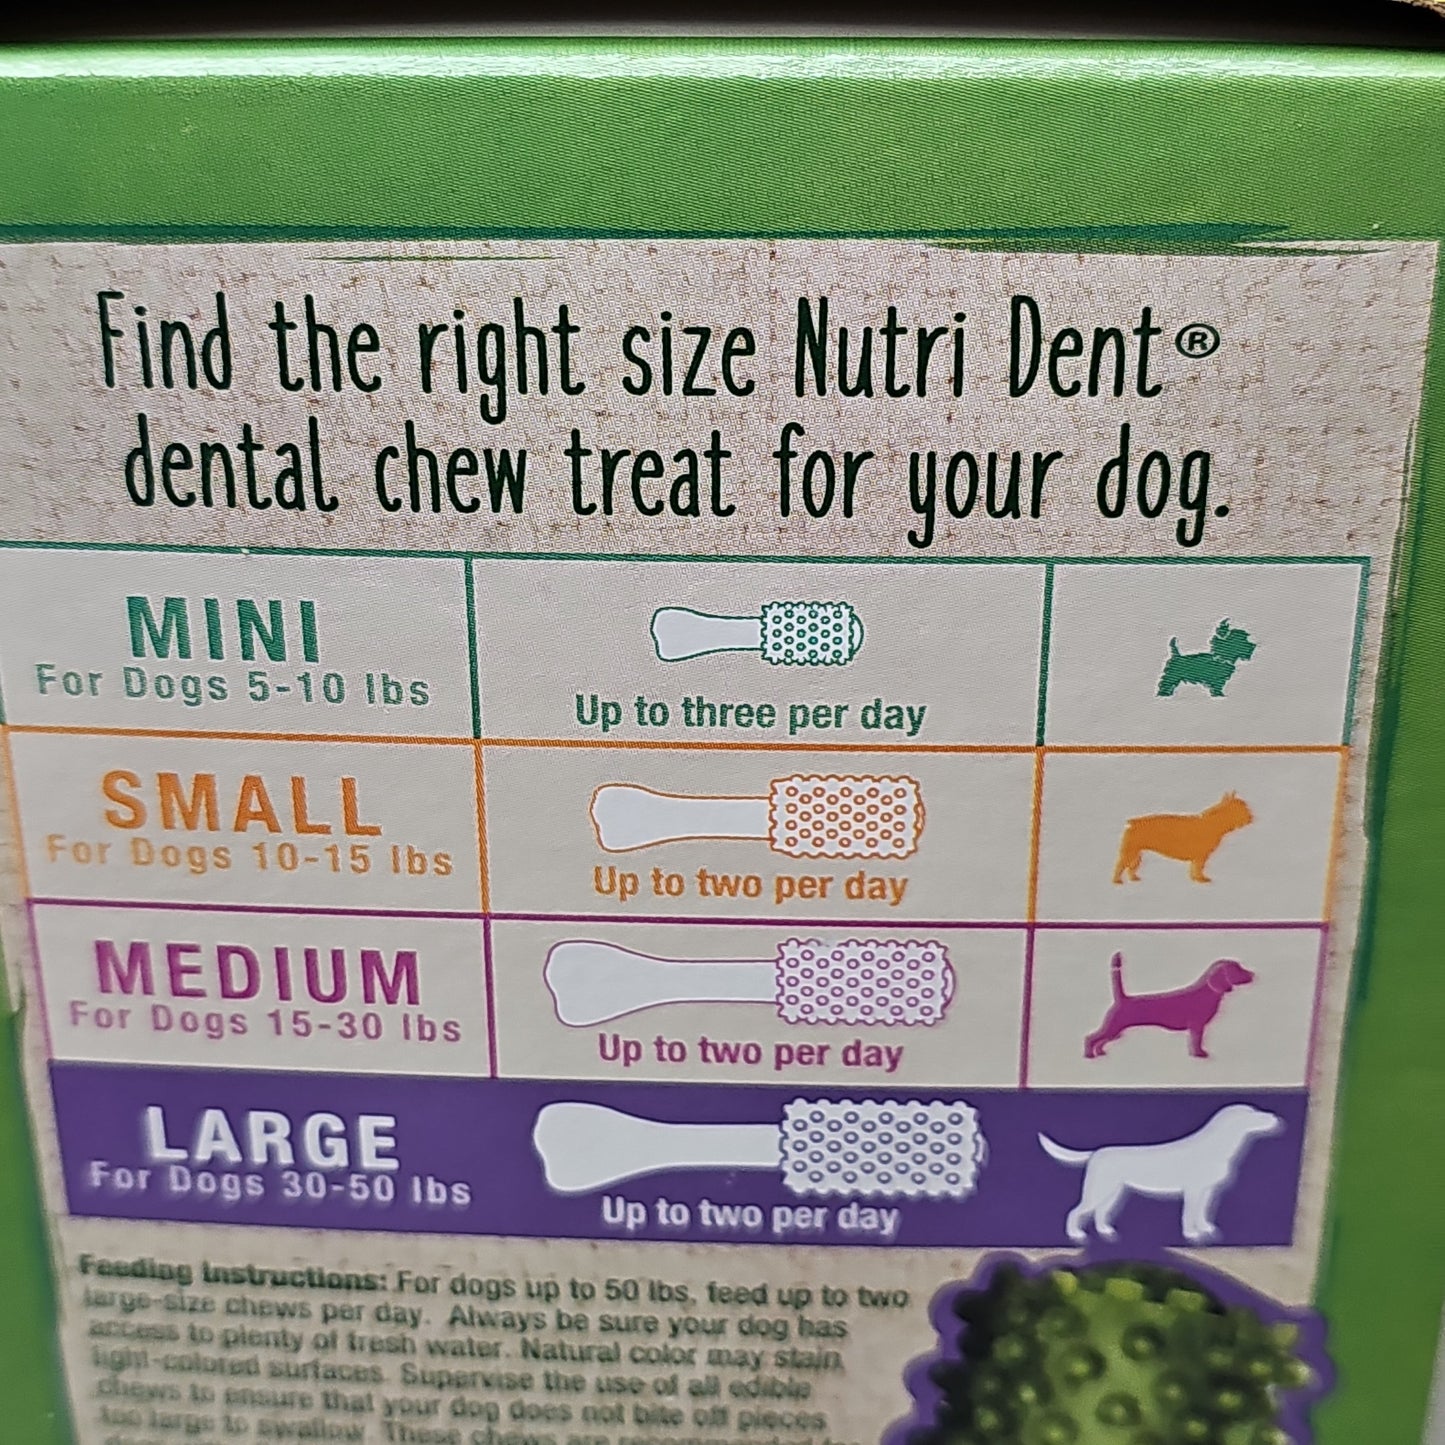 Z@ NYLABONE Natural Nutri Dent Dogs 20 Count Large 30-50 Lbs Dental Chew Treats NTD443T20P (New)